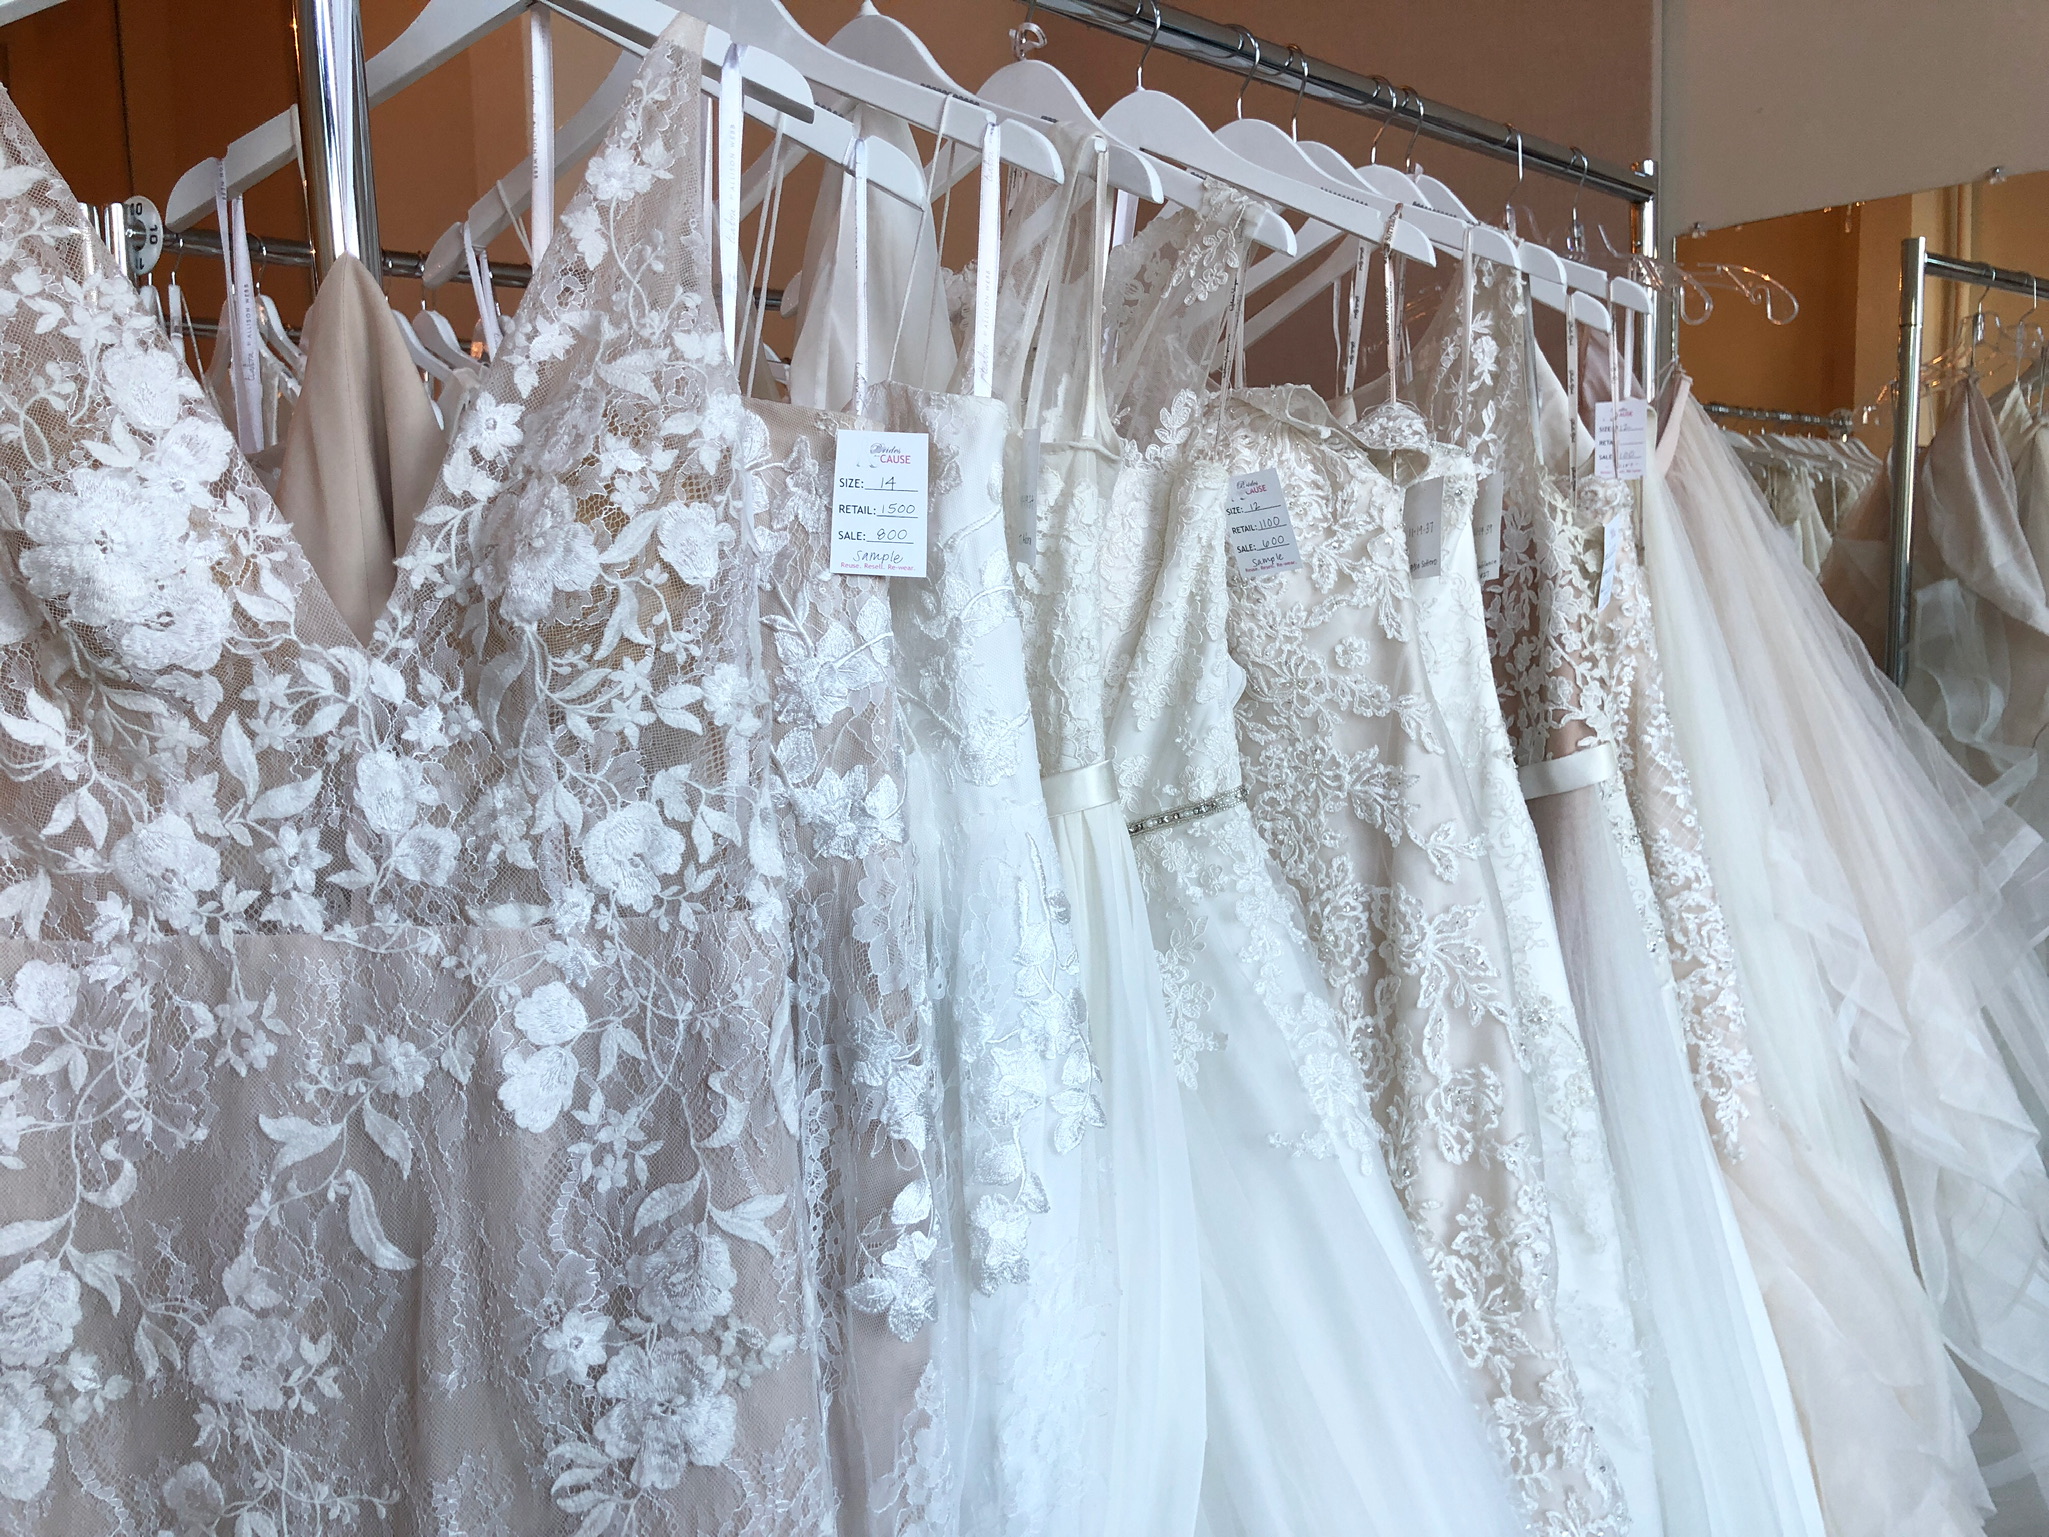 Bella Lily Dress Donation in PDX – Brides For a Cause